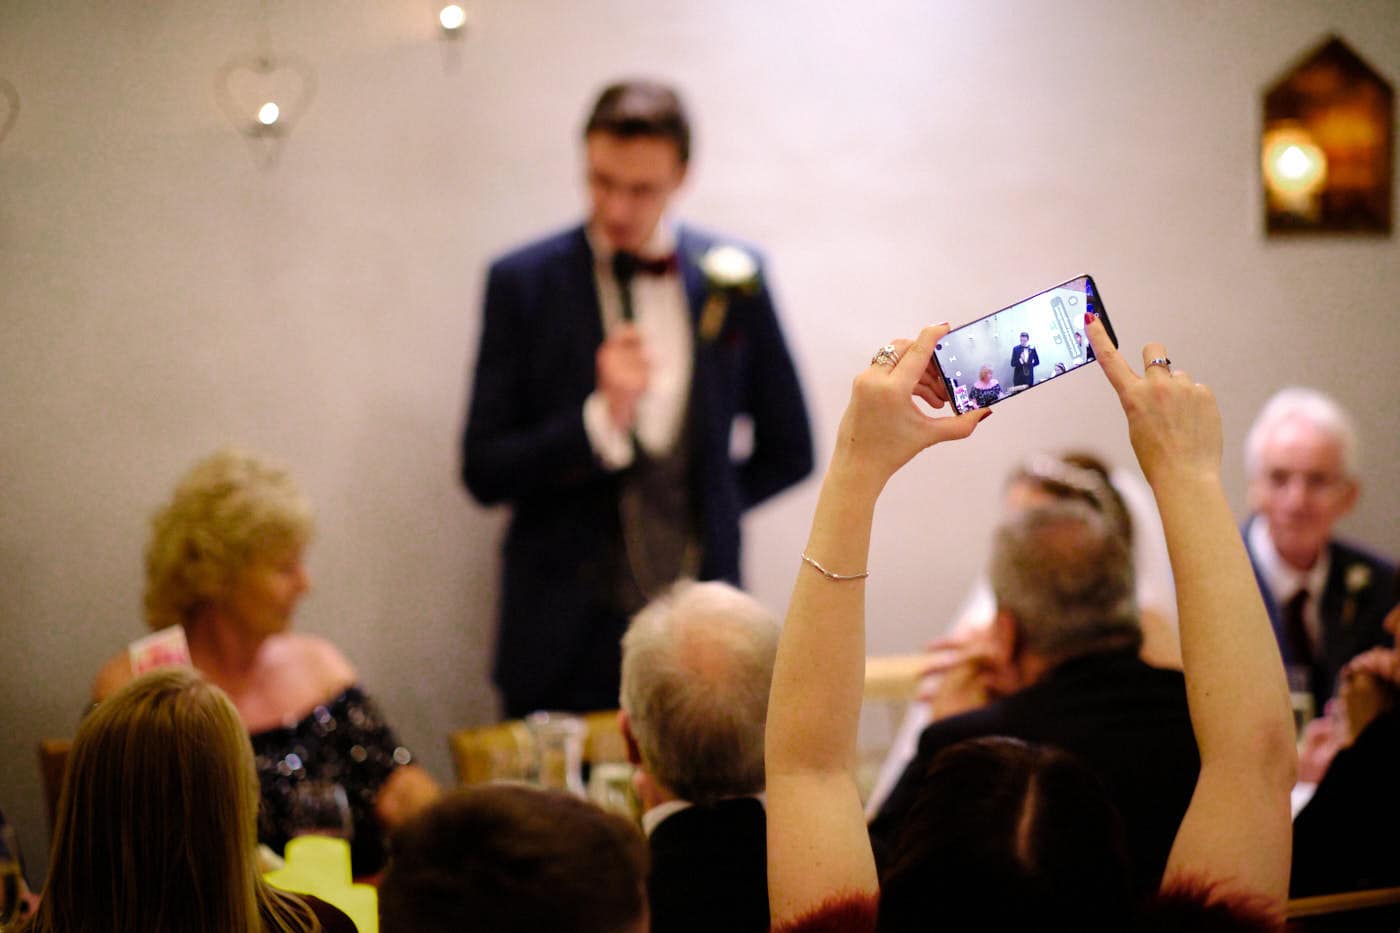 Guests taking photo of groom during speech